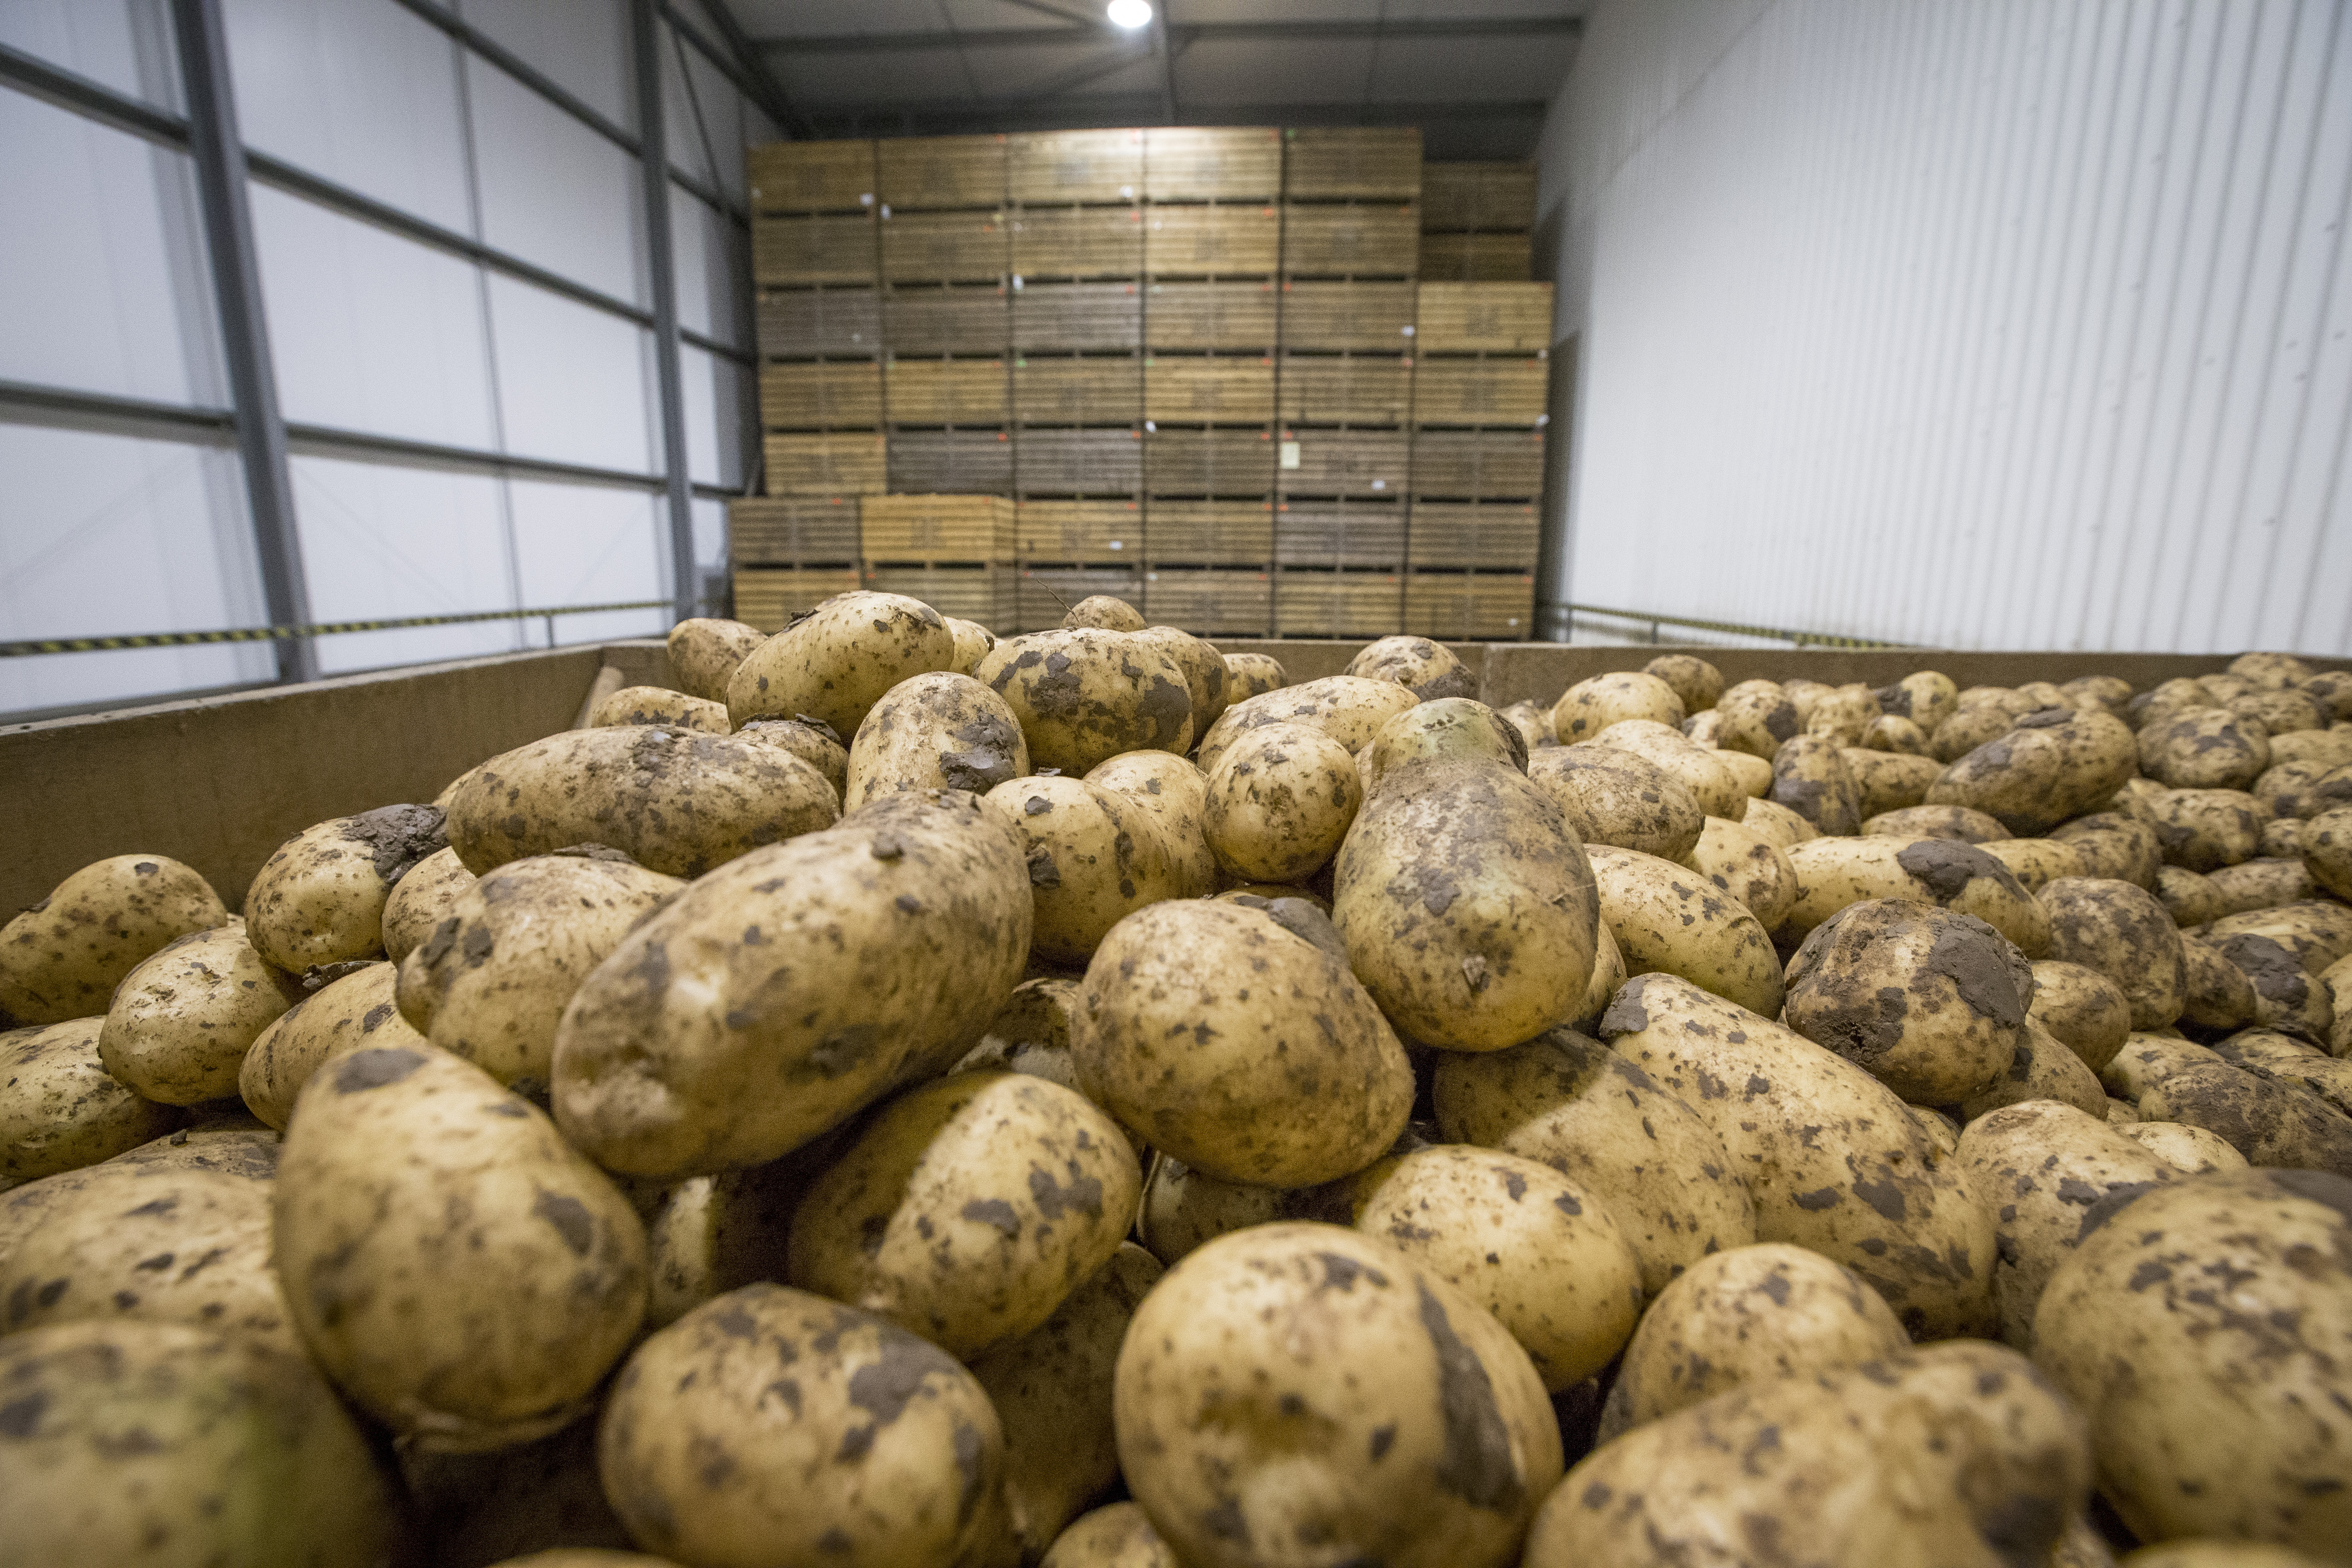 The value of potatoes decreased to £641m with a 19% fall in production blamed on the summer drought.